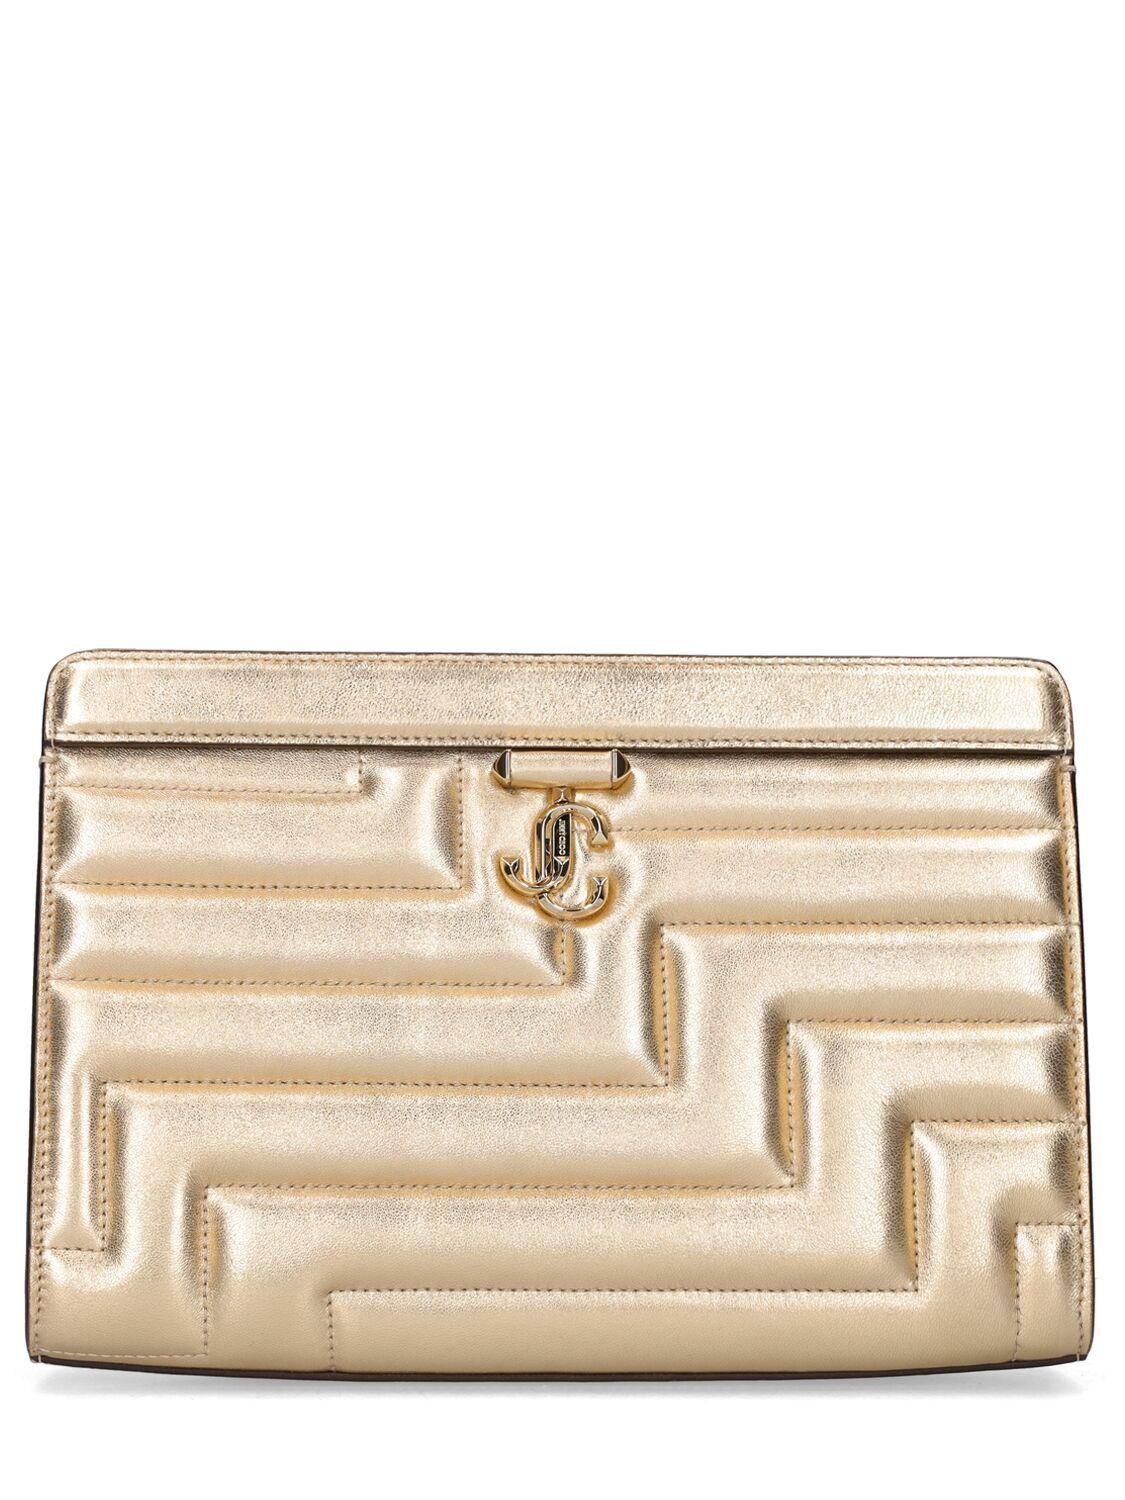 Jimmy Choo Avenue Quilted Metallic Pouch in Natural | Lyst